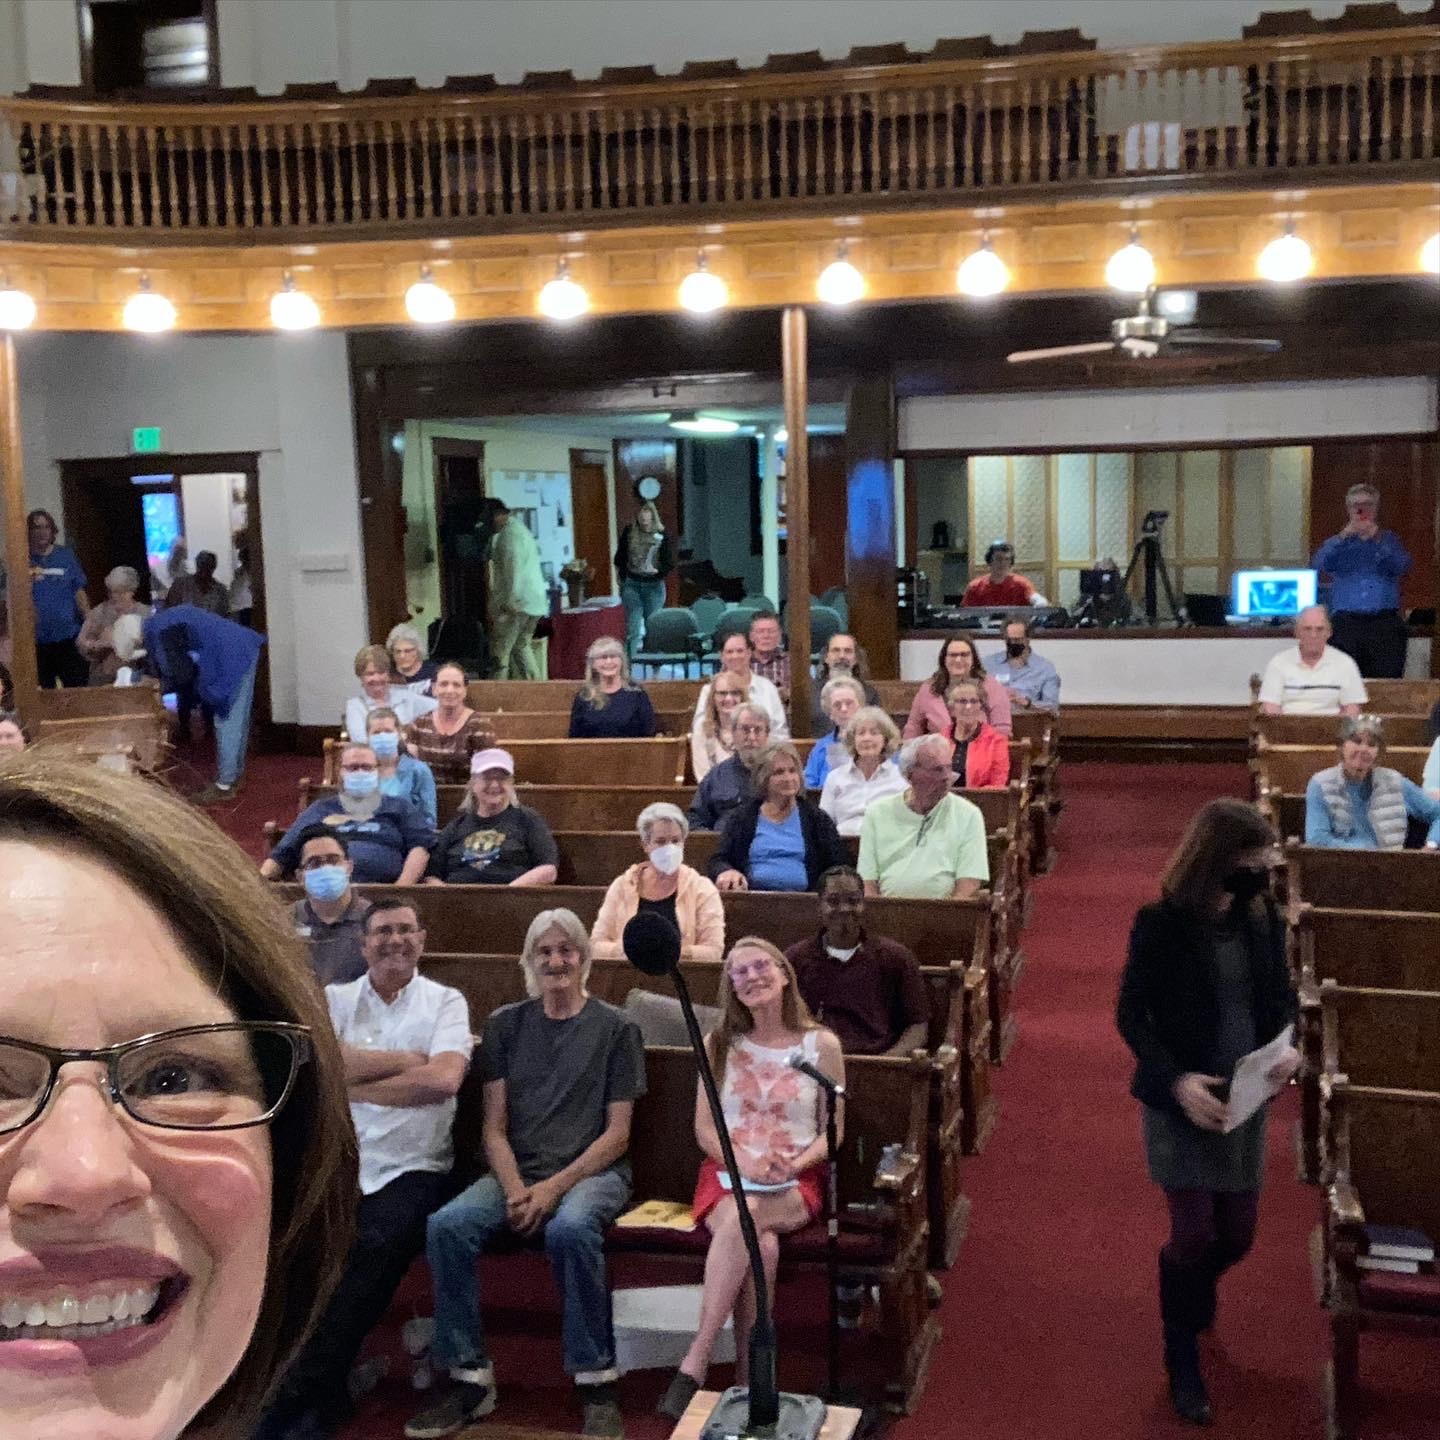 Woman taking selfie at front of church with congregants behind her